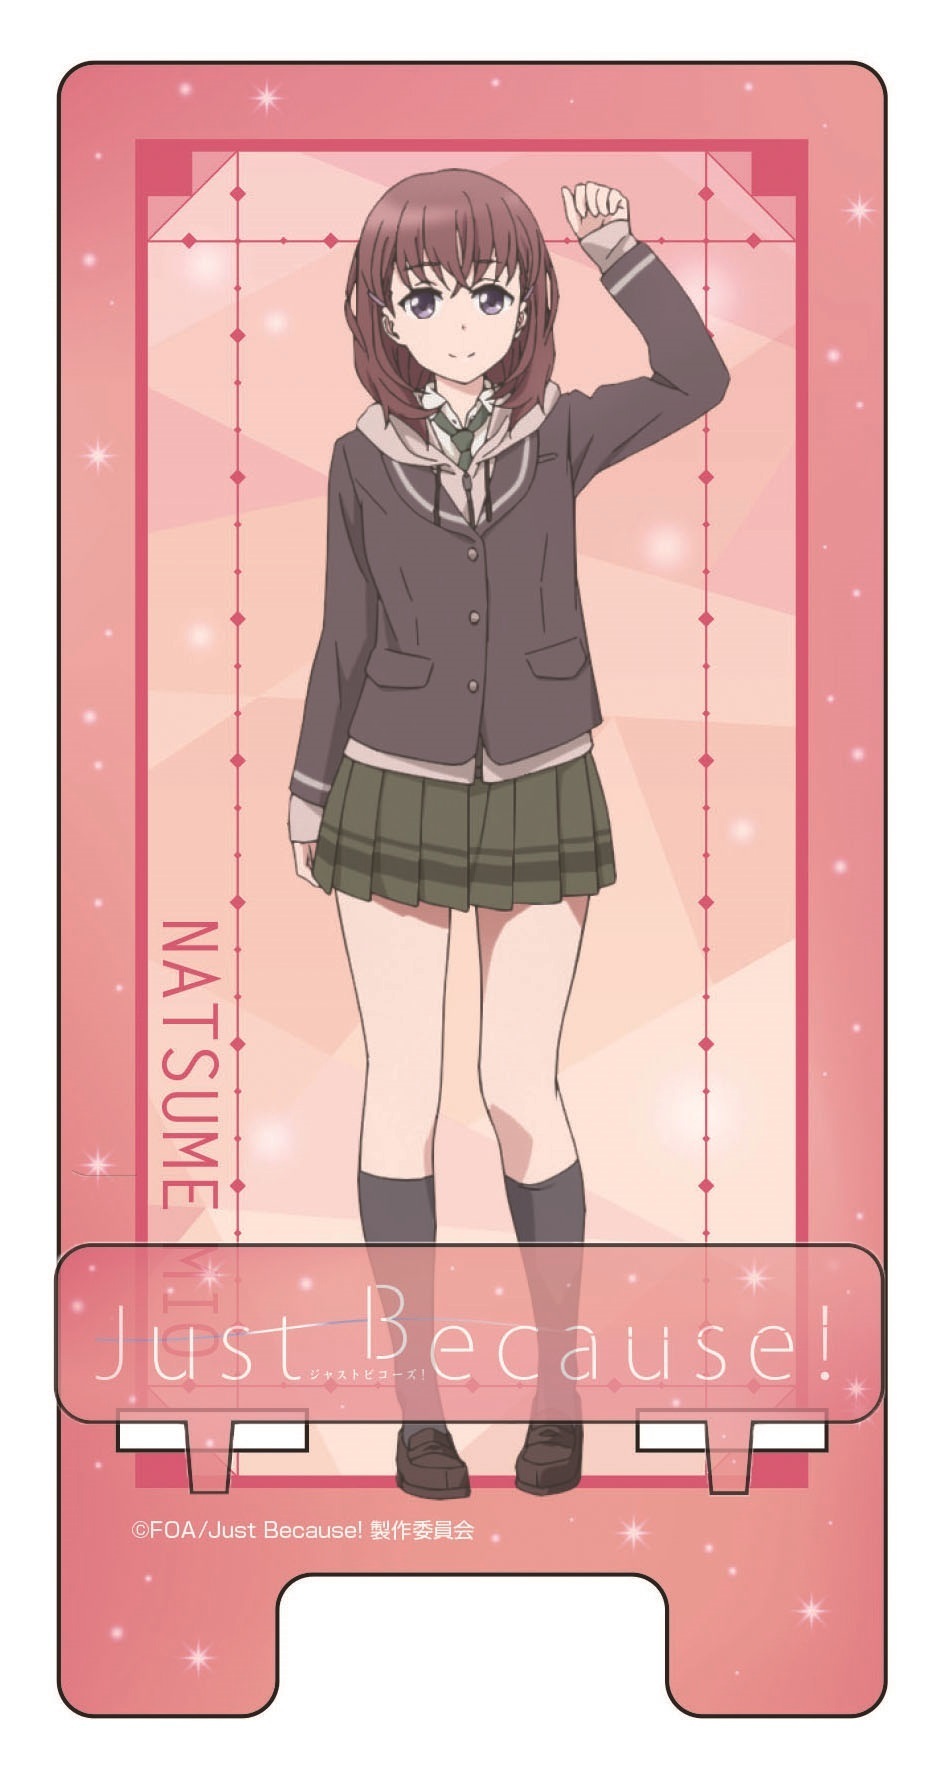 Just Because Acrylic Smartphone Stand 1 Natsume Mio Just Because アクリルスマホスタンド 1 夏目美緒 Anime Goods Card Phone Accessories